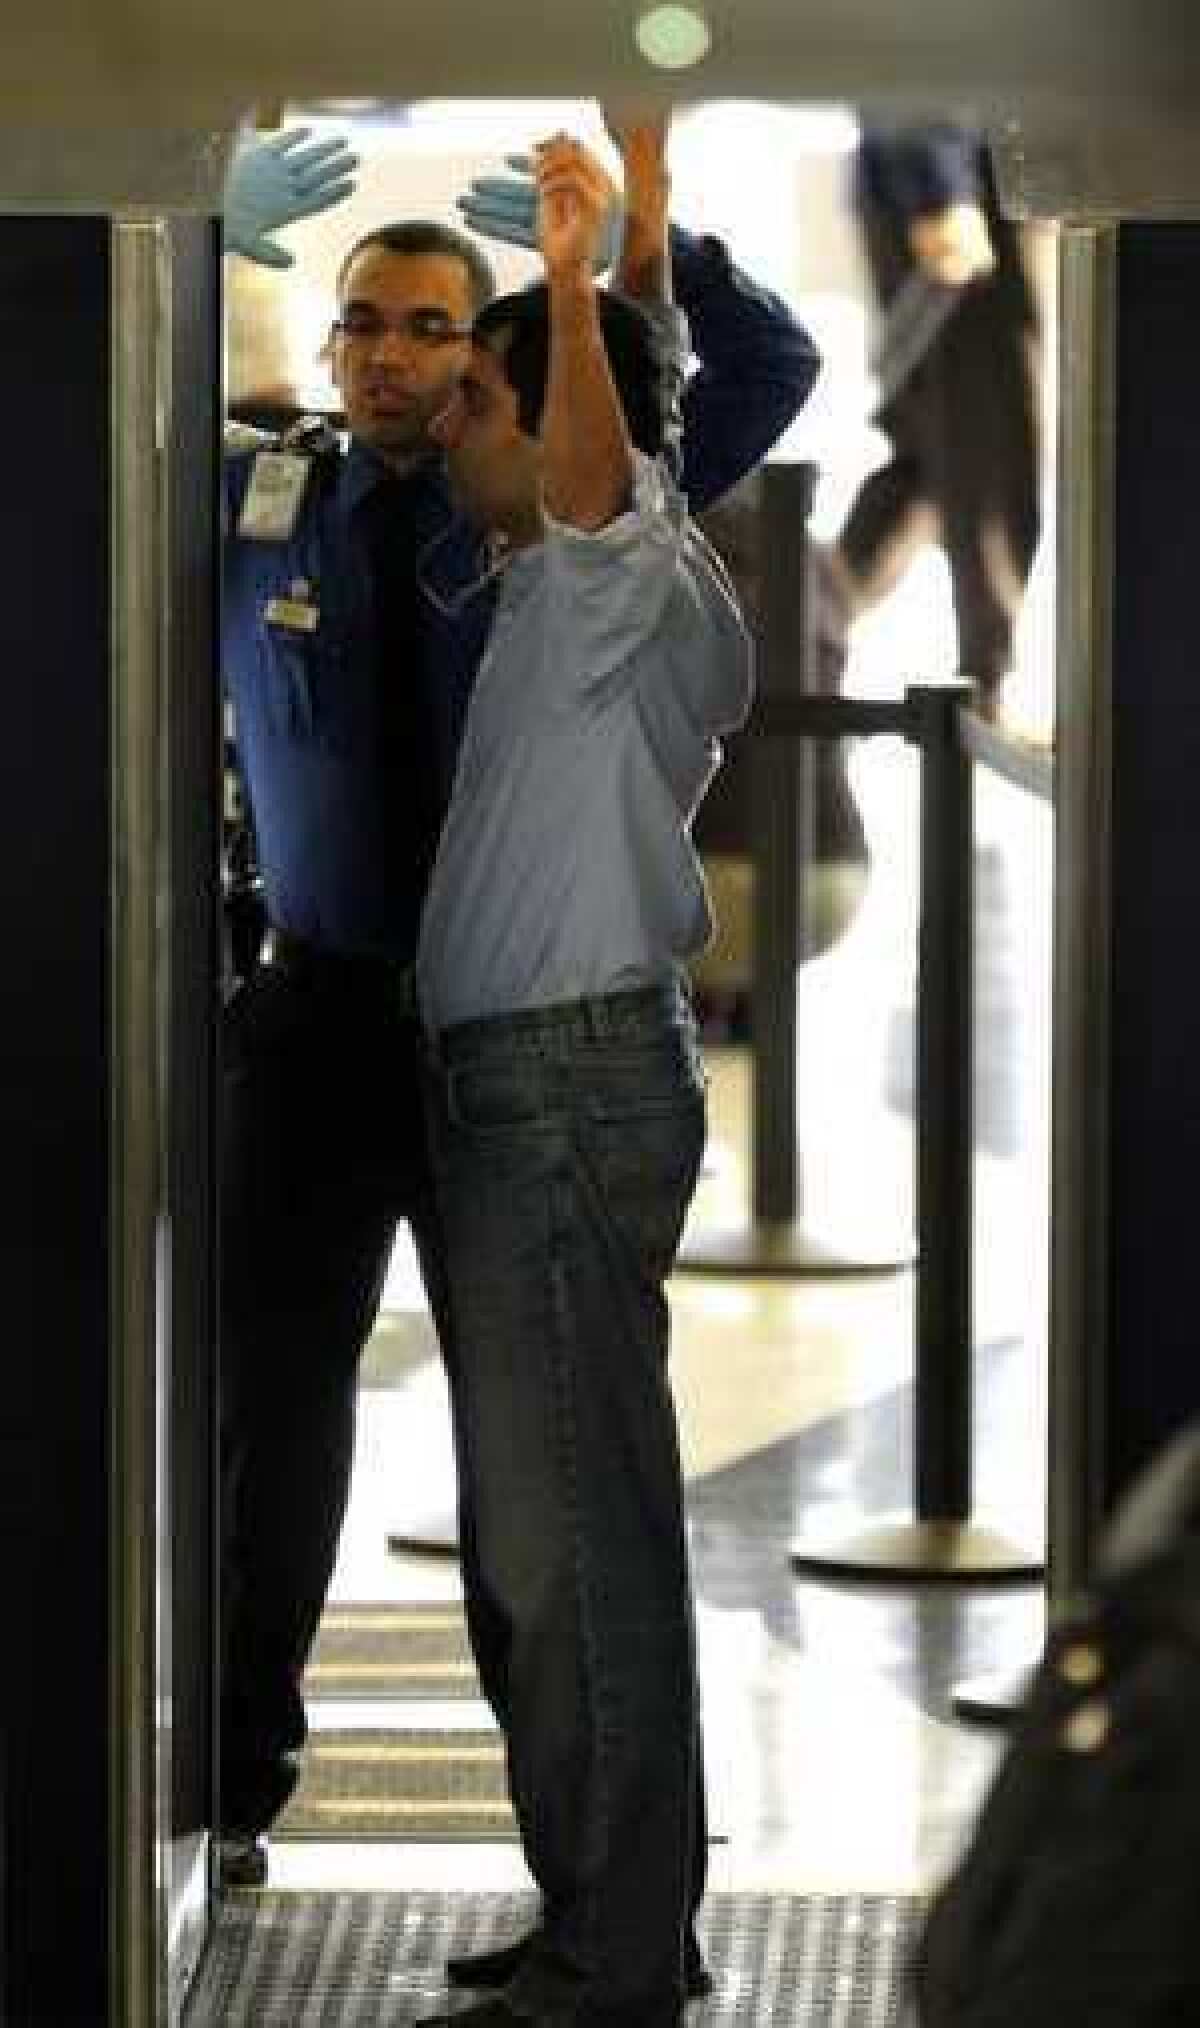 An airline passenger proceeds through a full-body scanner this week at Chicago's O'Hare Airport.